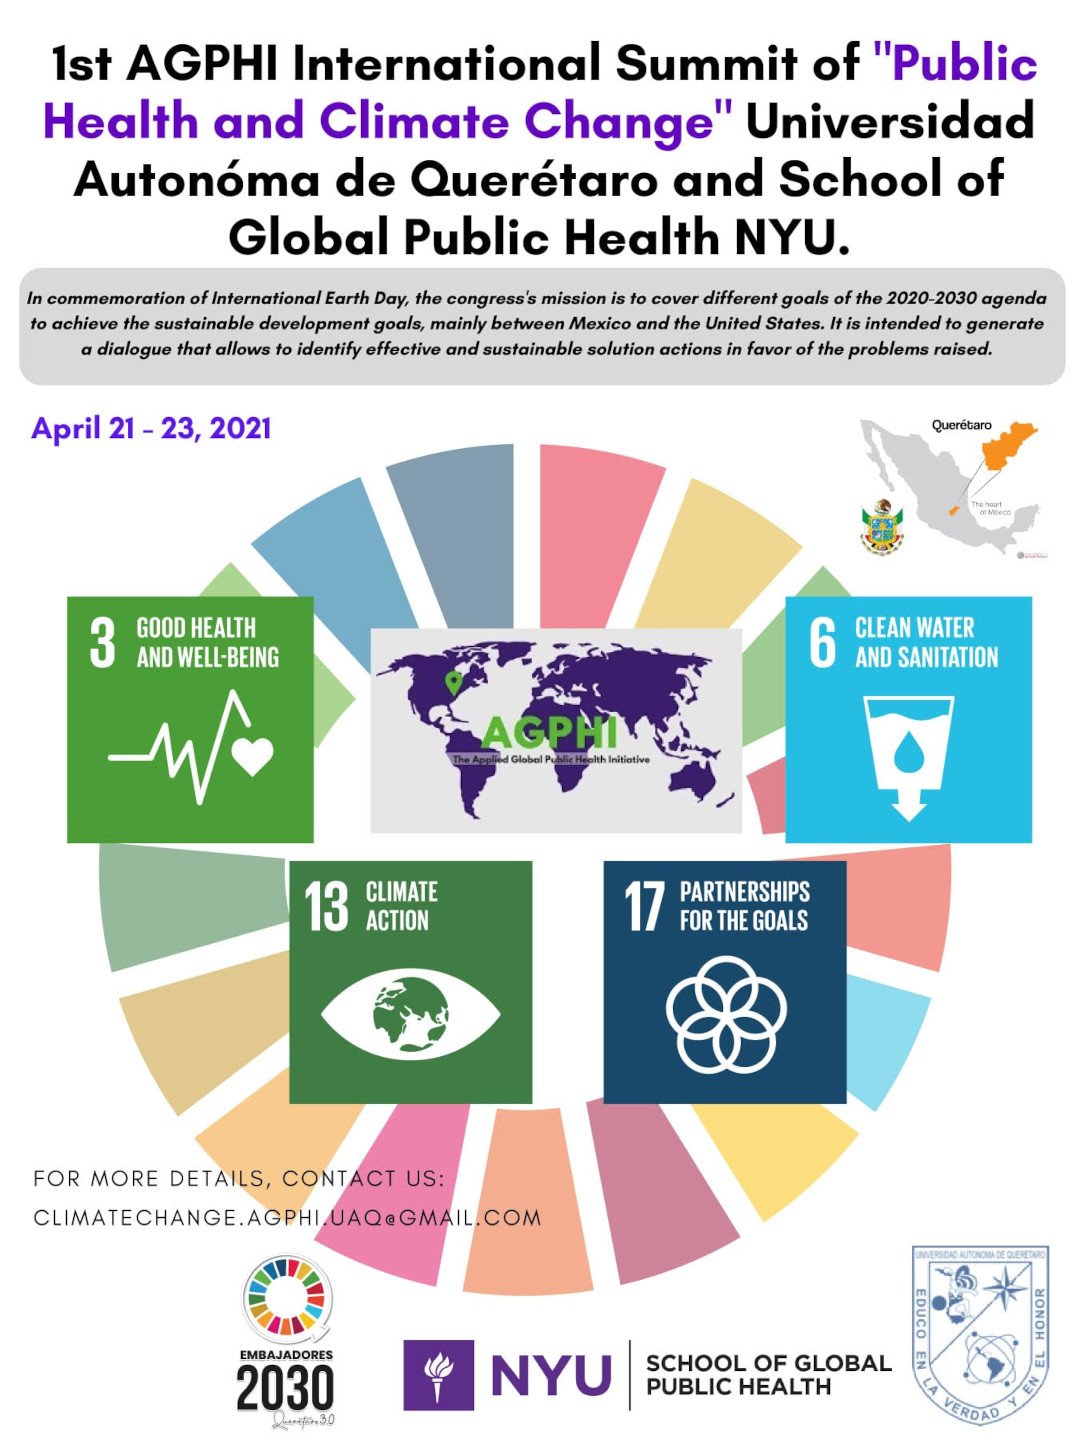 The 1st AGPHI International Summit on “Public Health and Climate Change” to be organized by Universidad Autonoma de Queretaro and School of Global Public Health of New York University (UAQ-NYU)